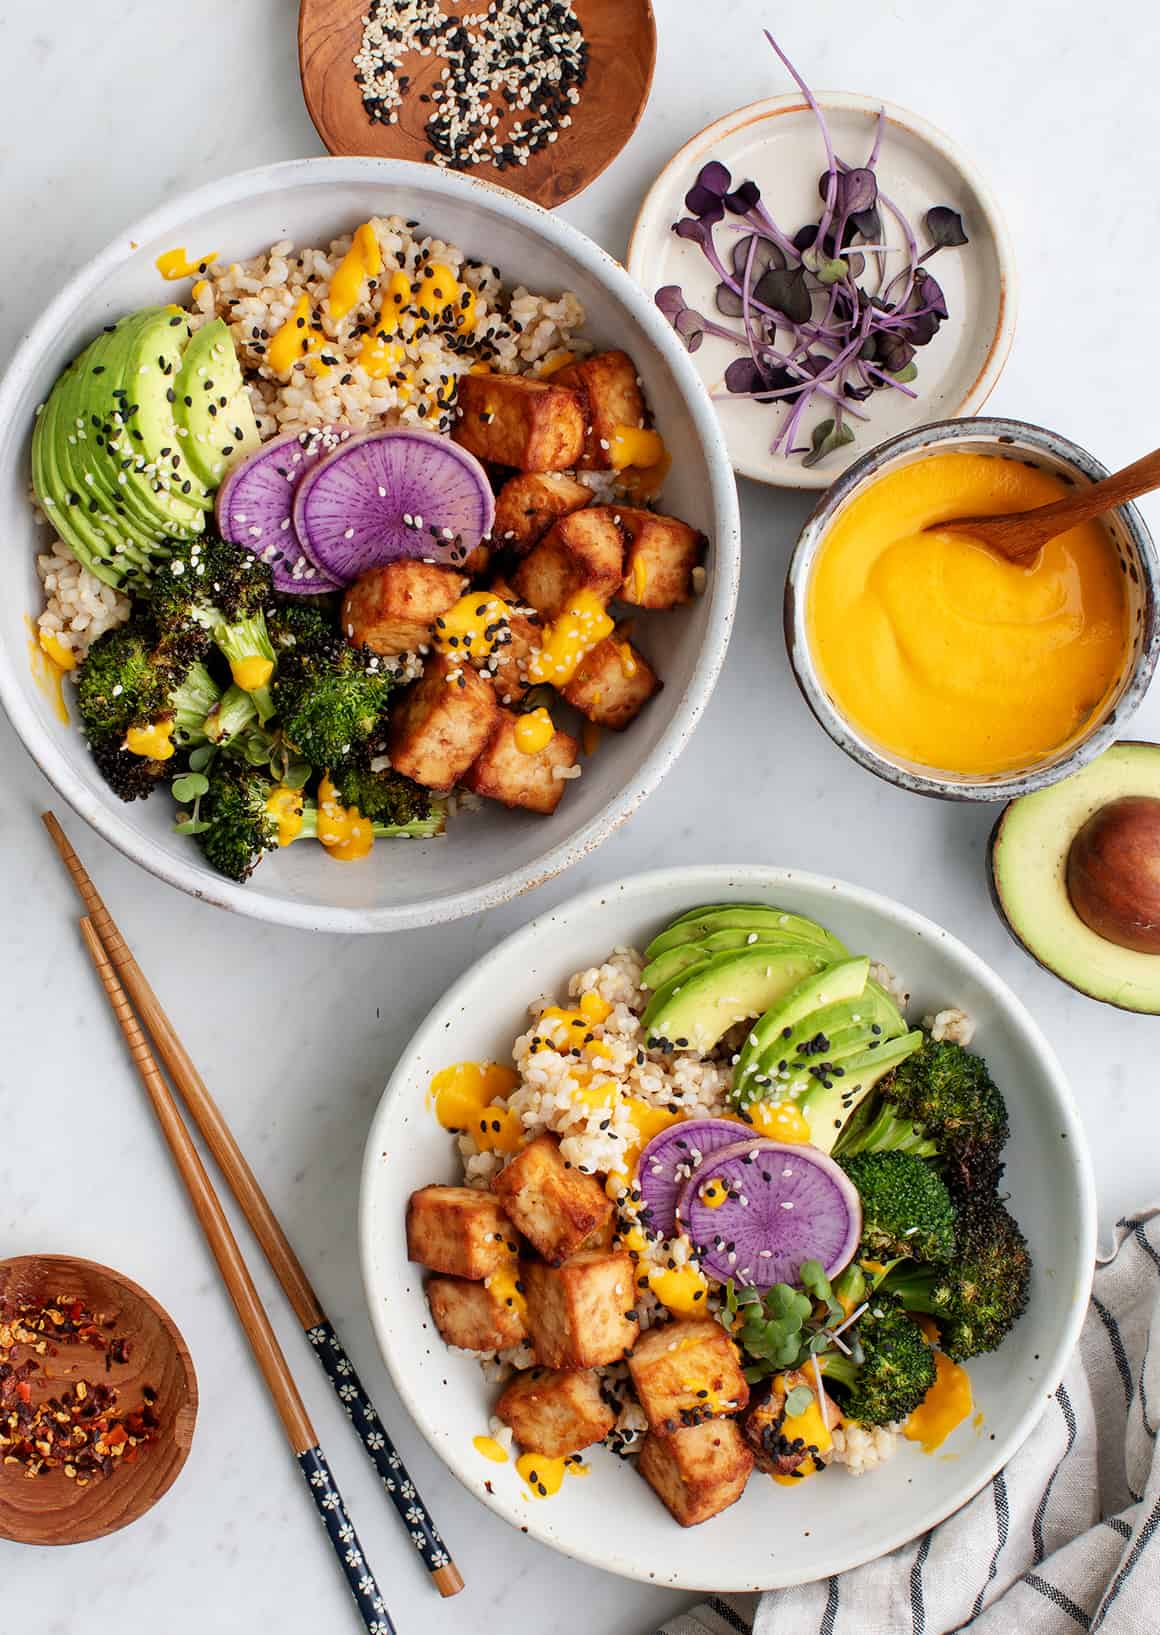 Two bowls filled with brown rice, crispy tofu, broccoli, purple daikon radish slices, avocado, and carrot ginger dressing